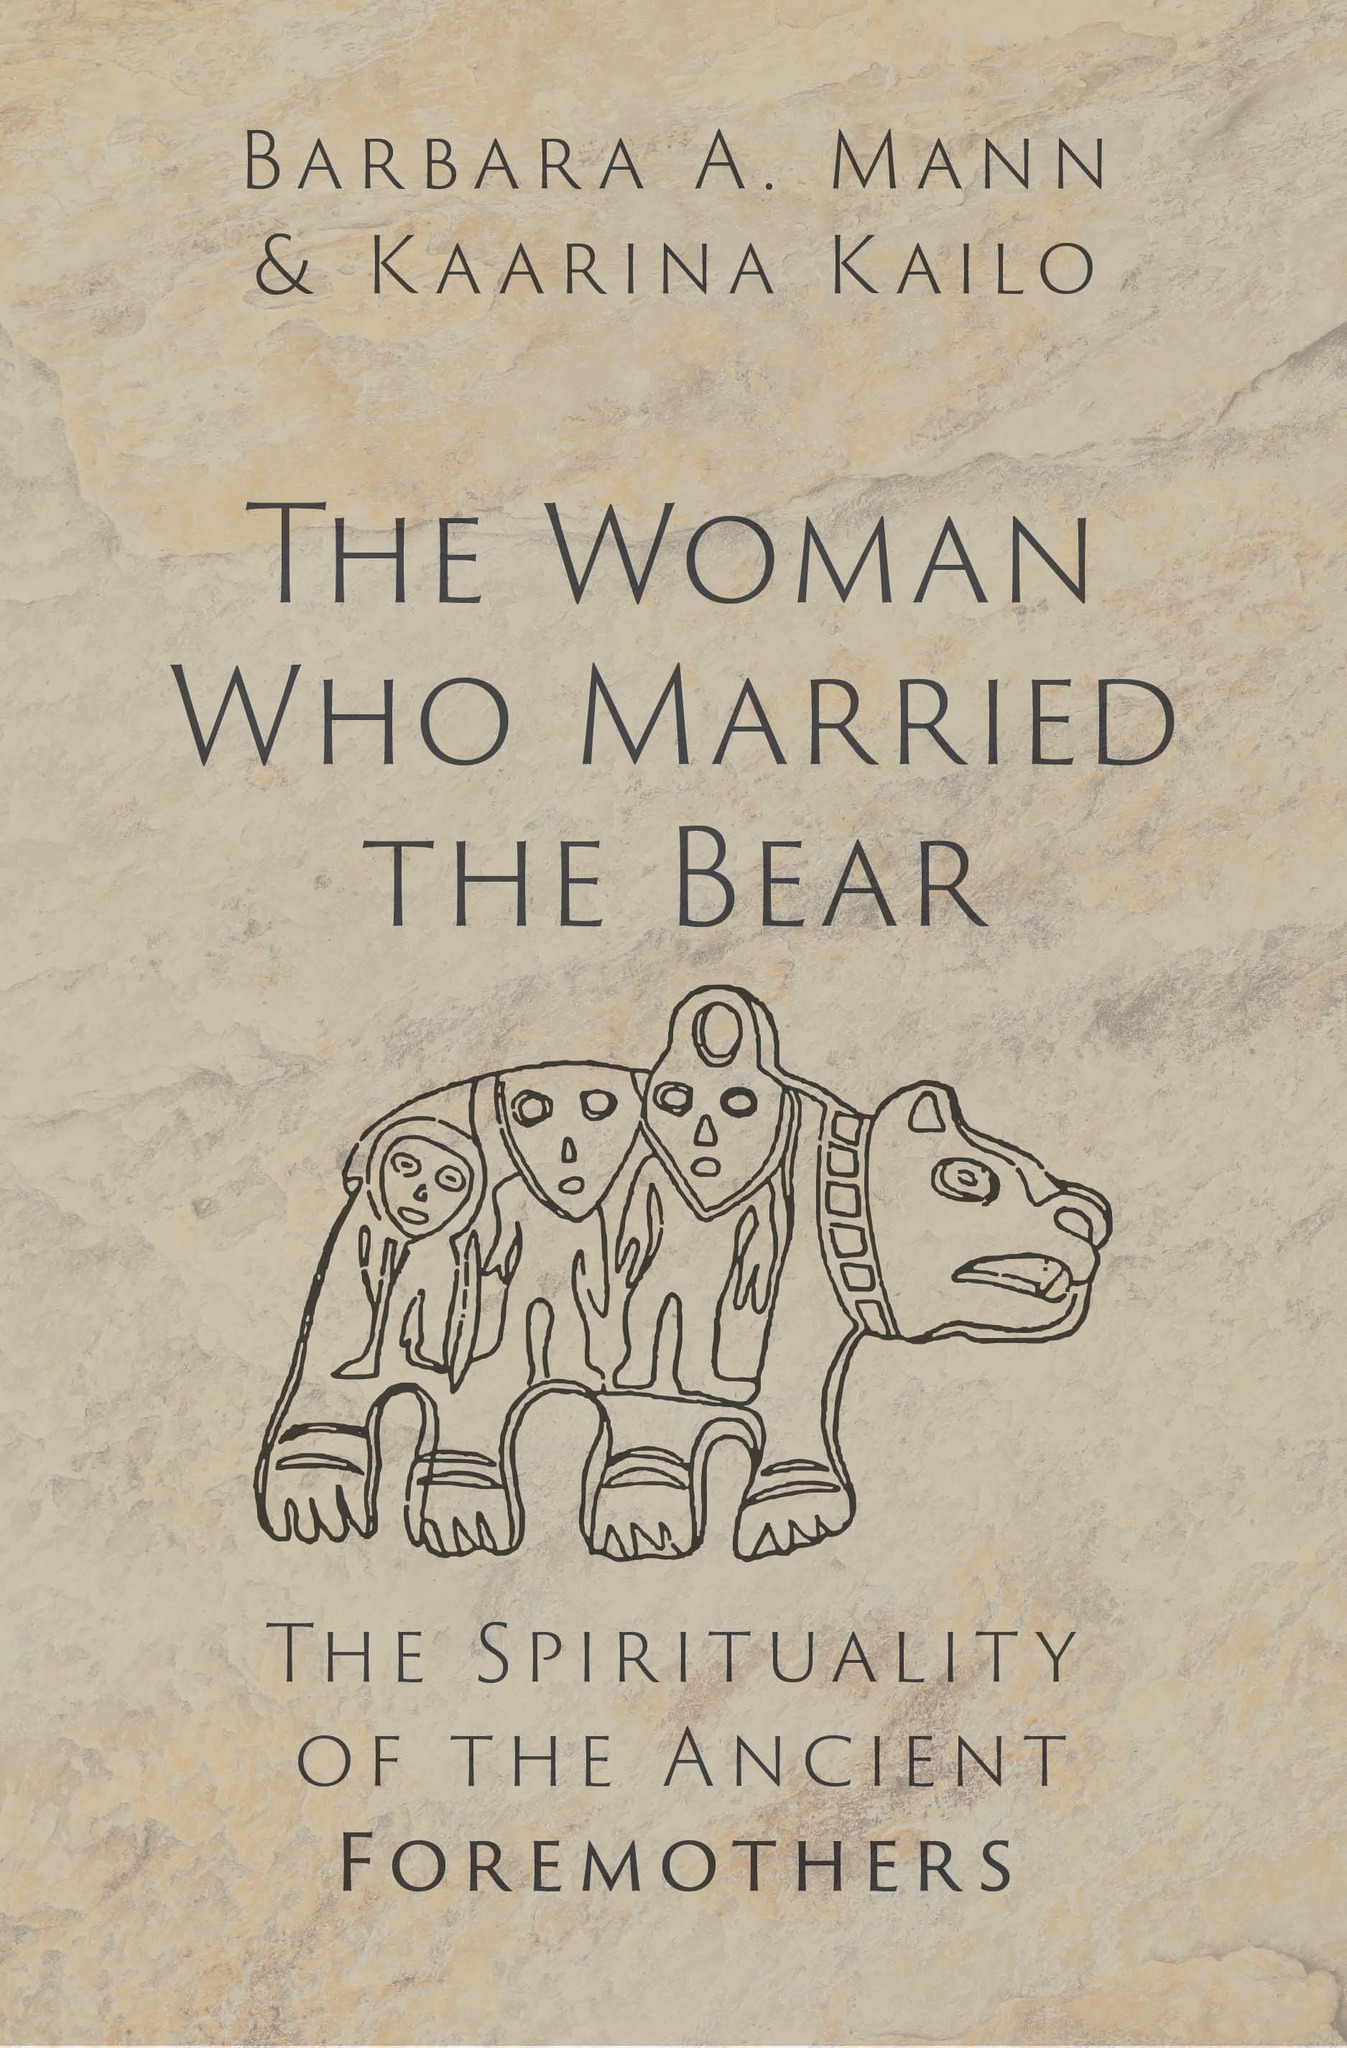 The Woman Who Married the Bear book cover